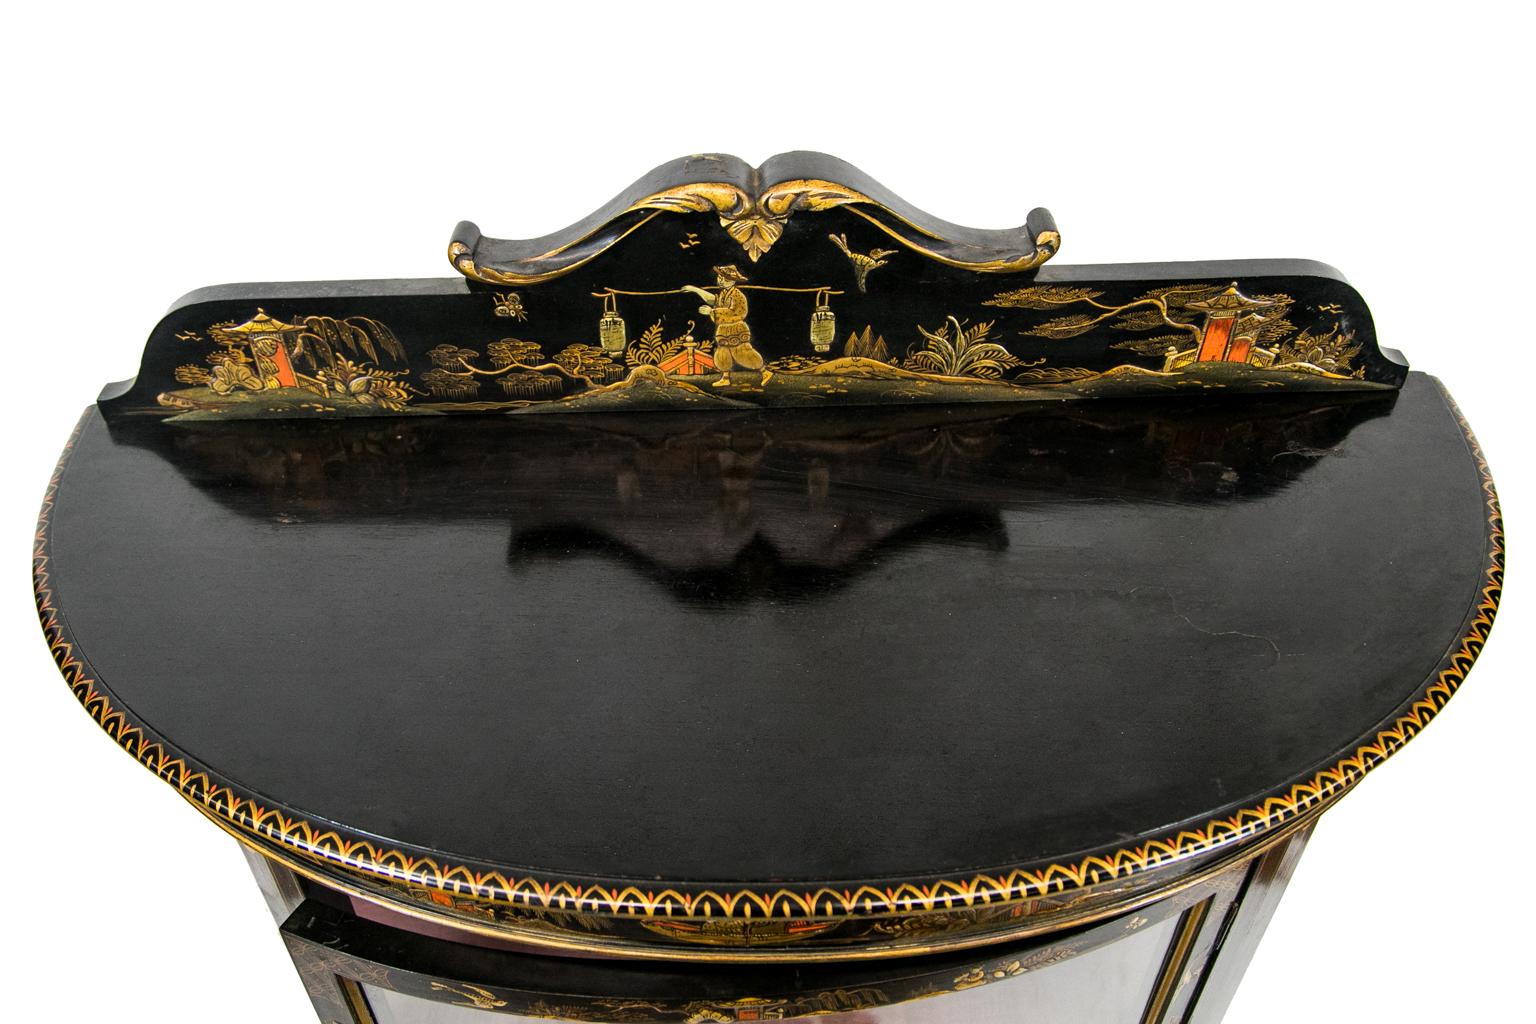 English Chinoiserie display case, the sides and front are curved, creating a demilune front. The inside has fabric upholstery.